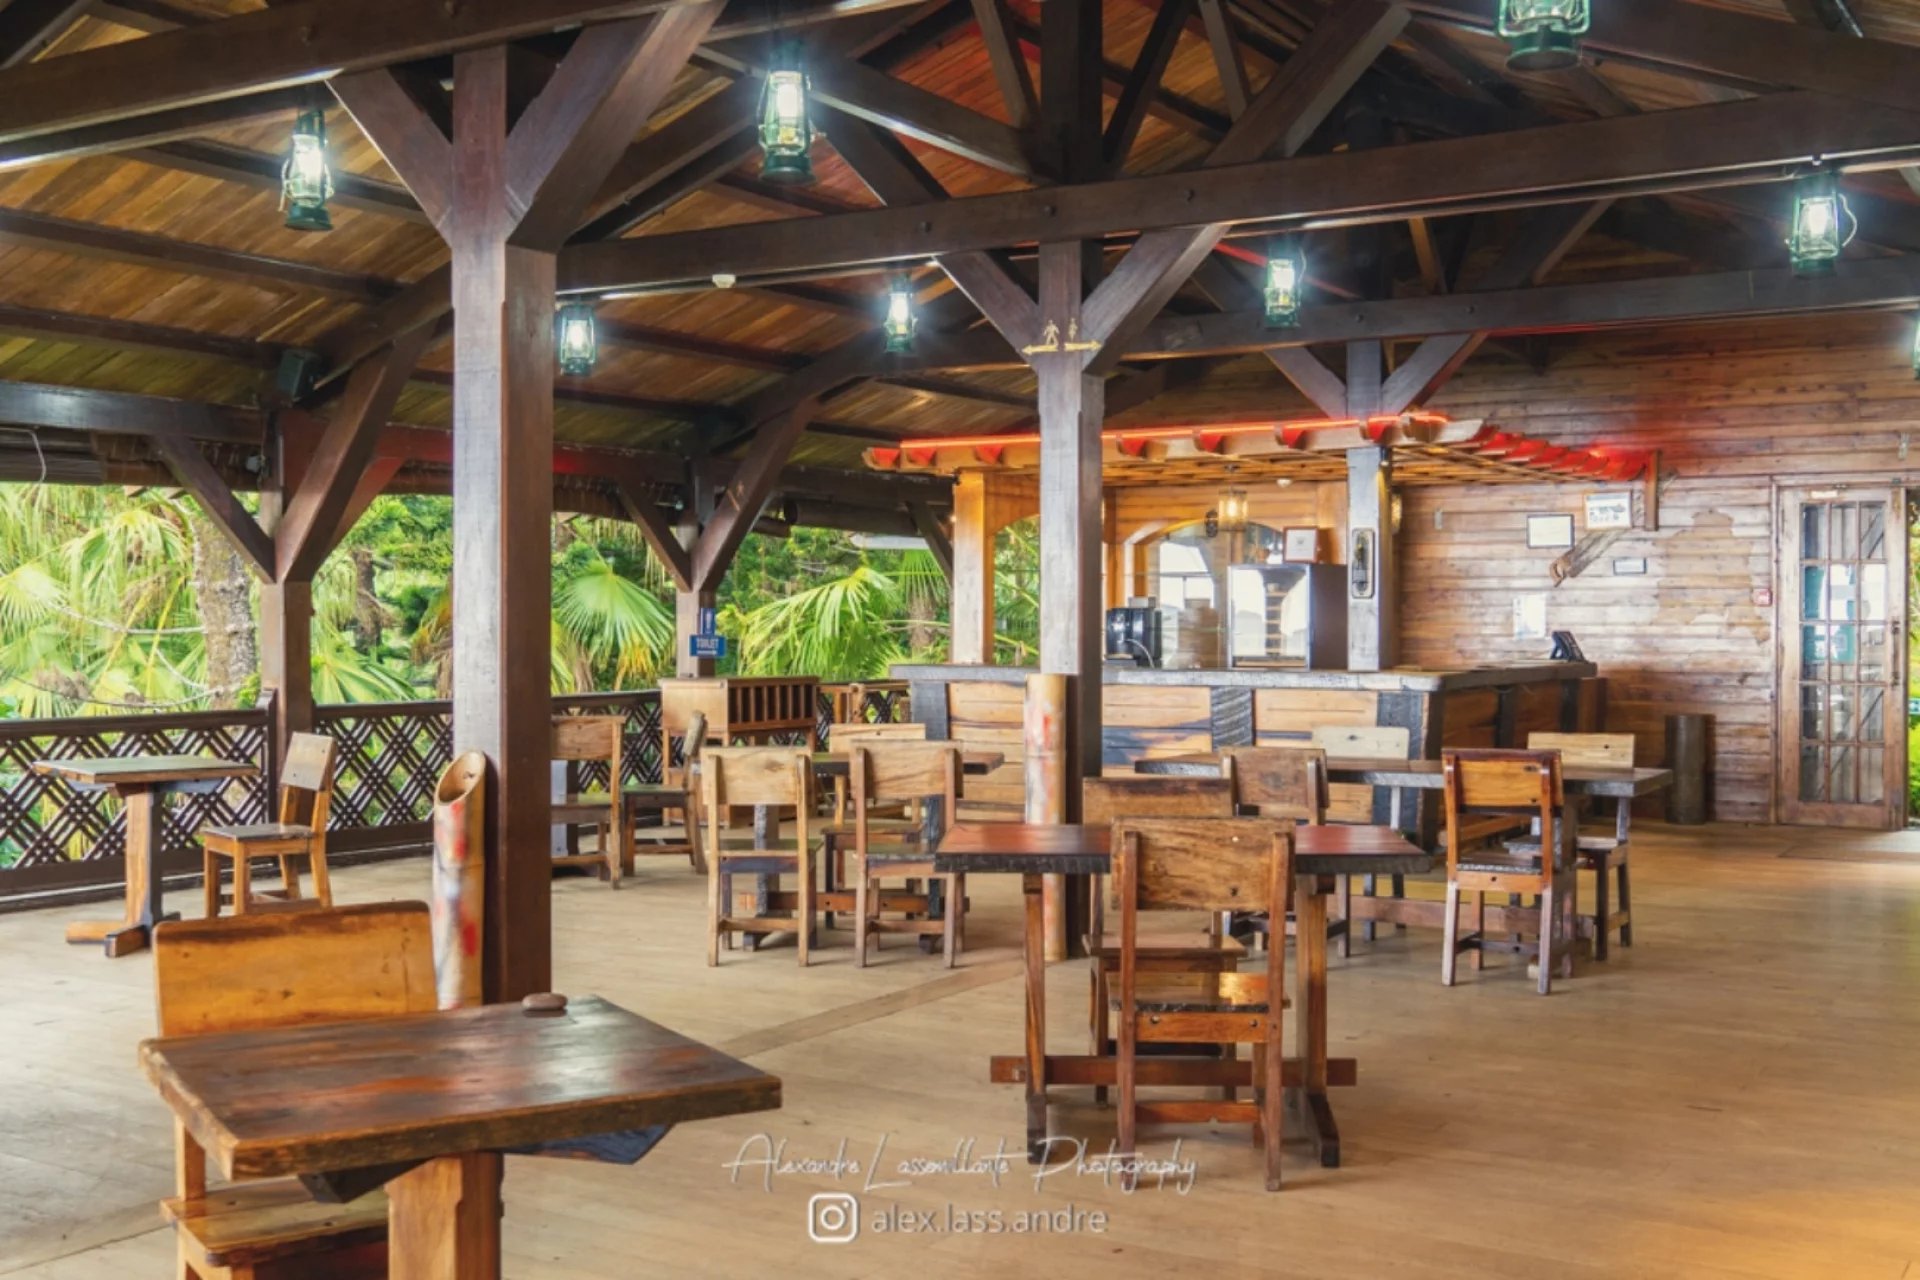 CHAMAREL - Villa and restaurant - 3 bedrooms and 250 seats - picture 4 title=